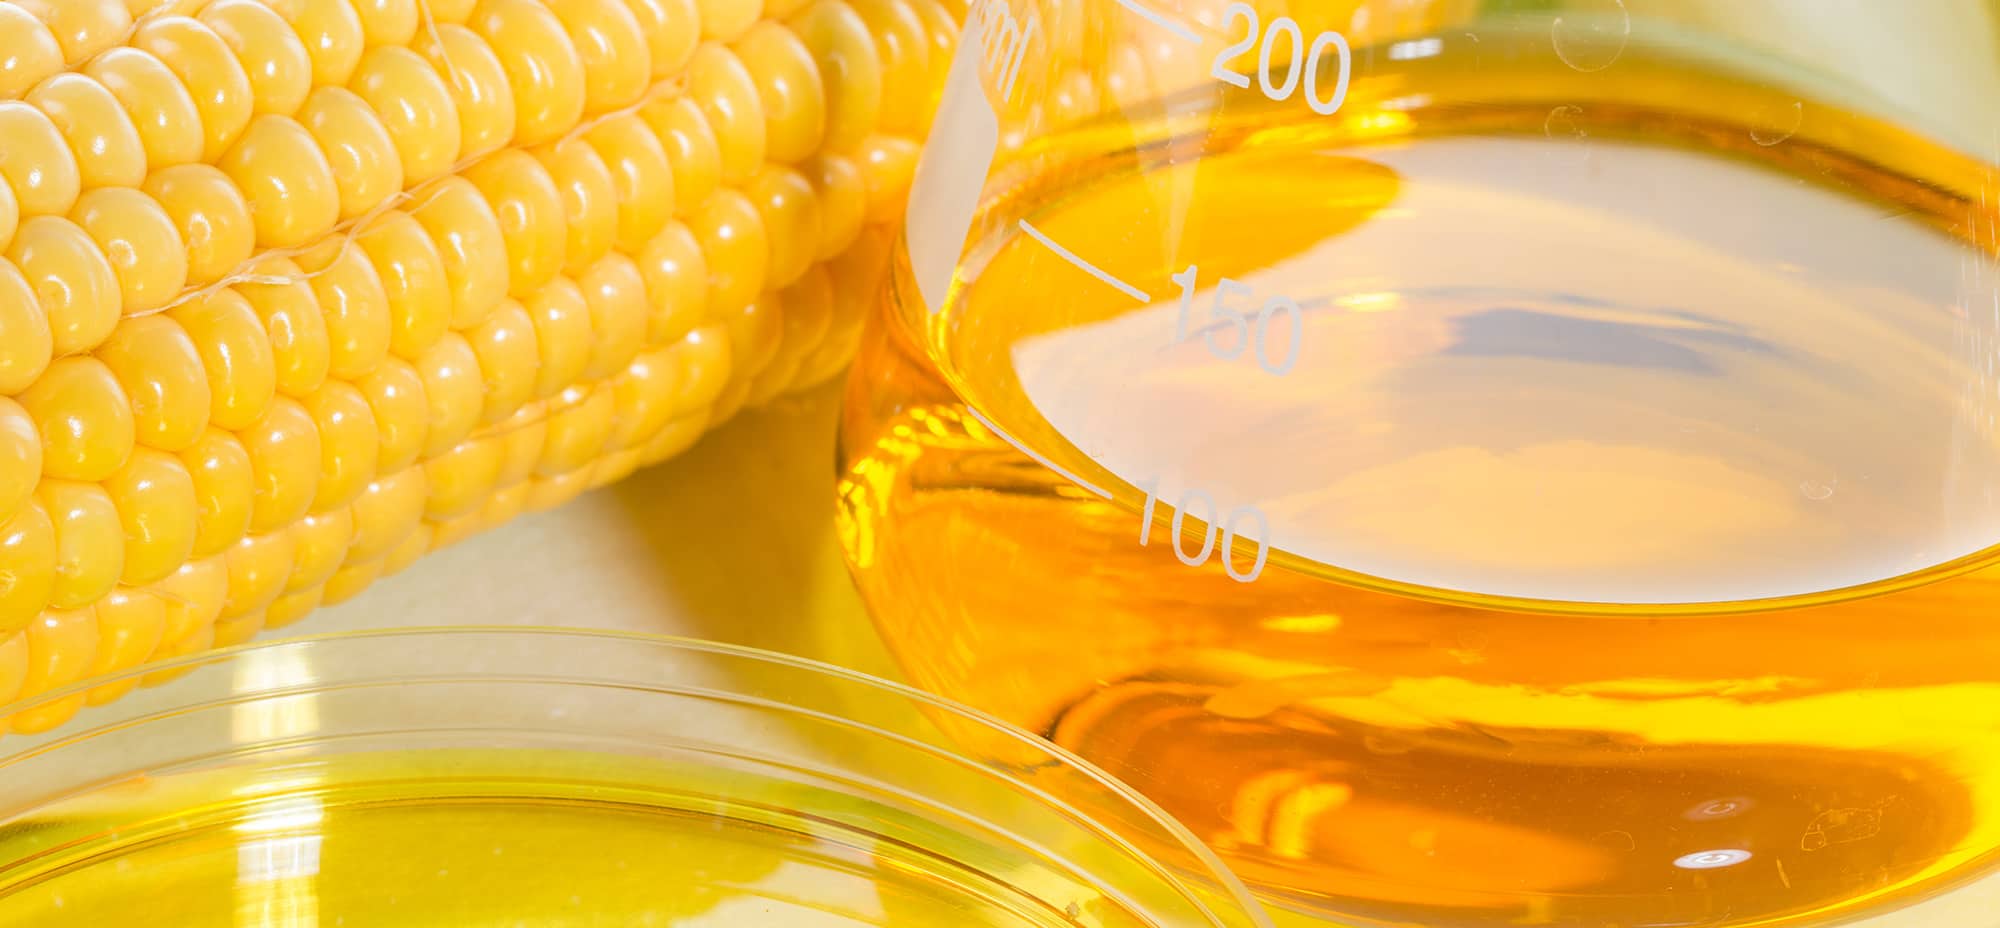 Image of corn syrup and a corn on a cob